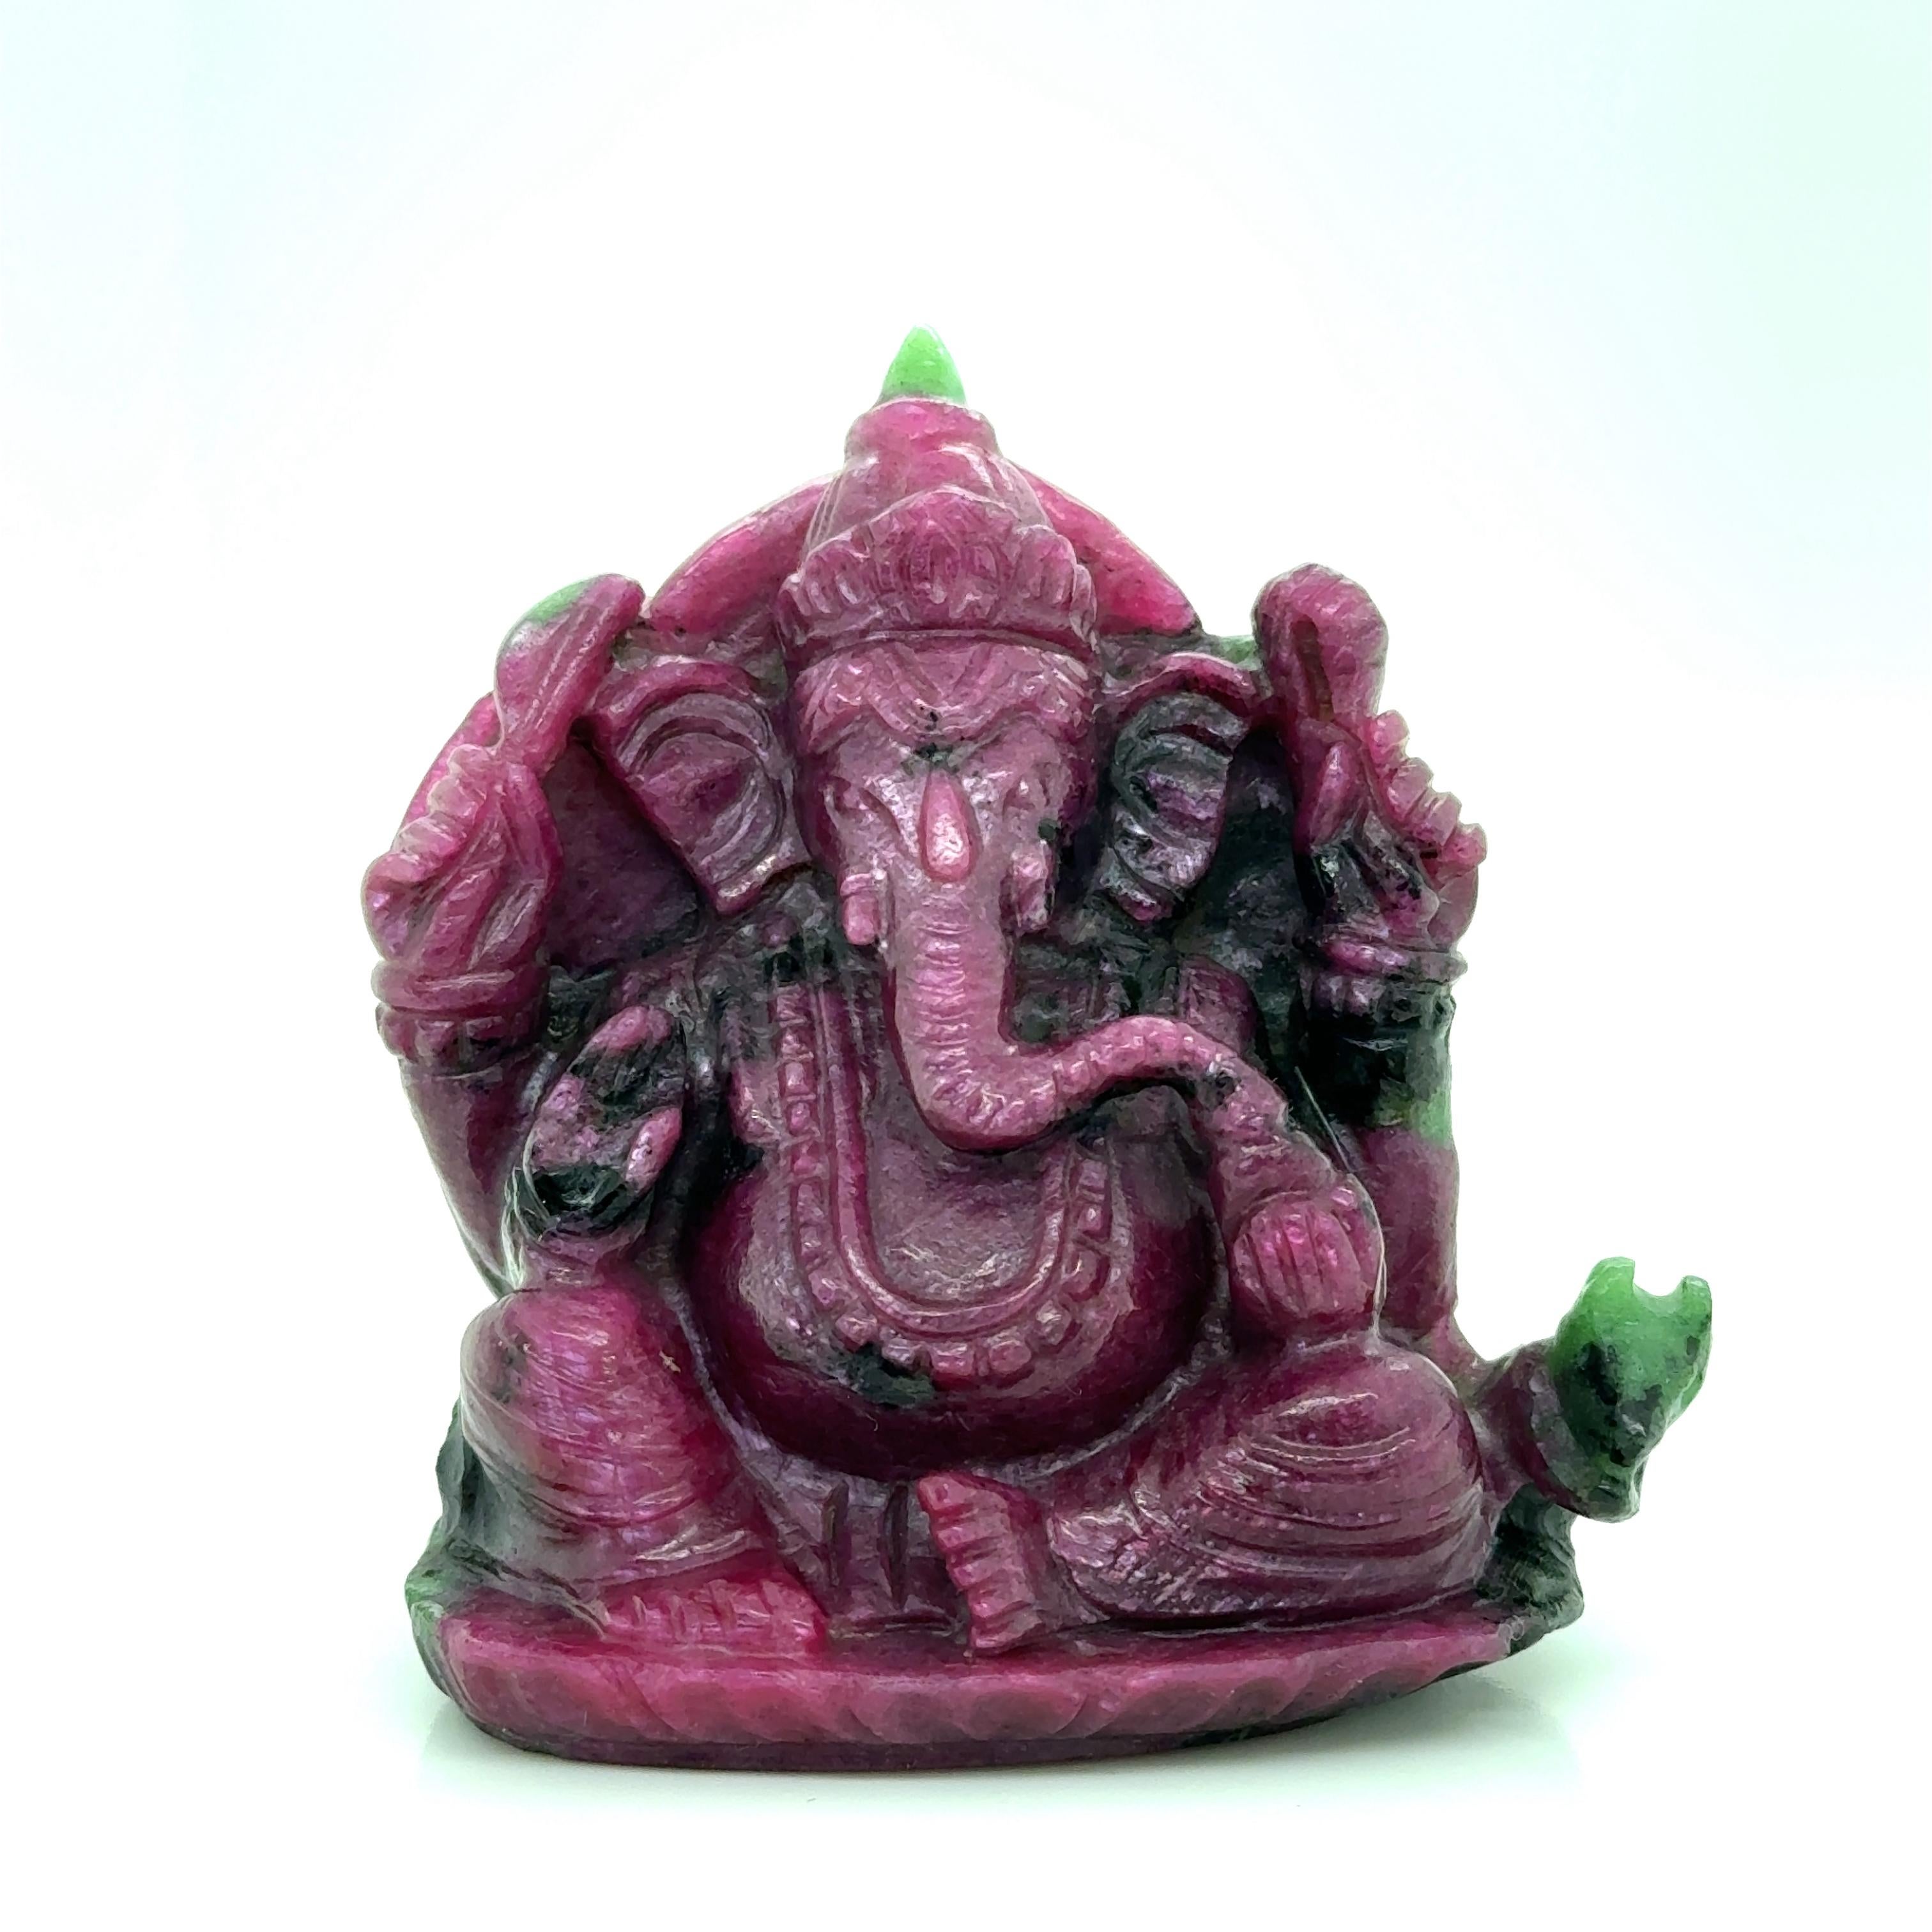 877.81 Carats Natural Tanzania Ruby Ganesha Carving Statue In New Condition For Sale In Jaipur, Rajasthan